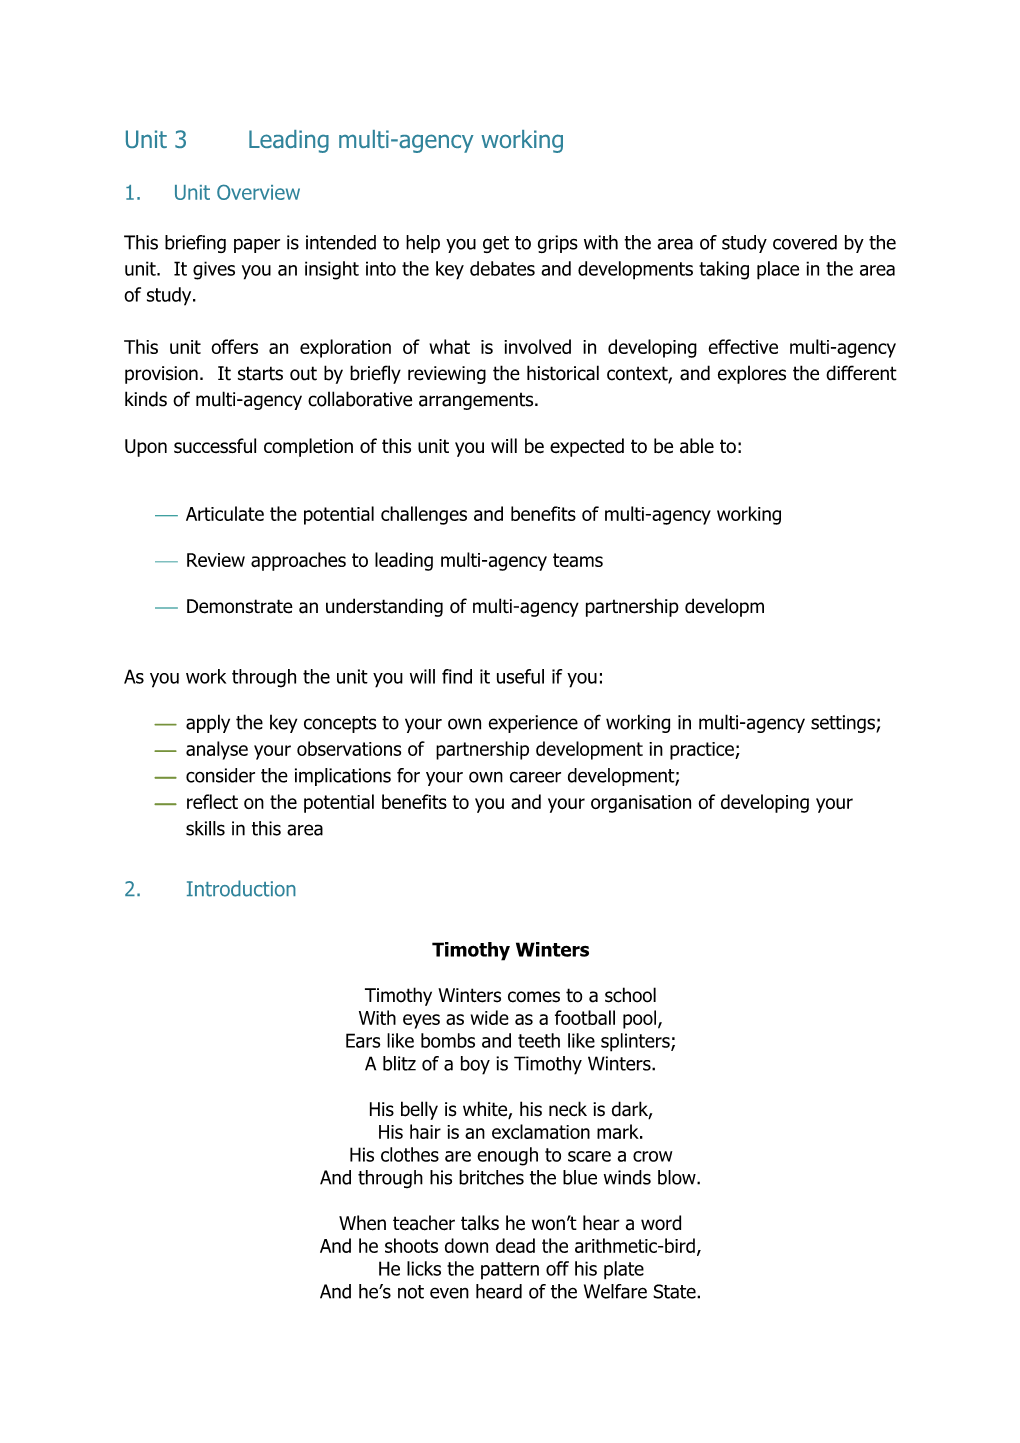 Leading Beyond the School Unit 3 Briefing Paper